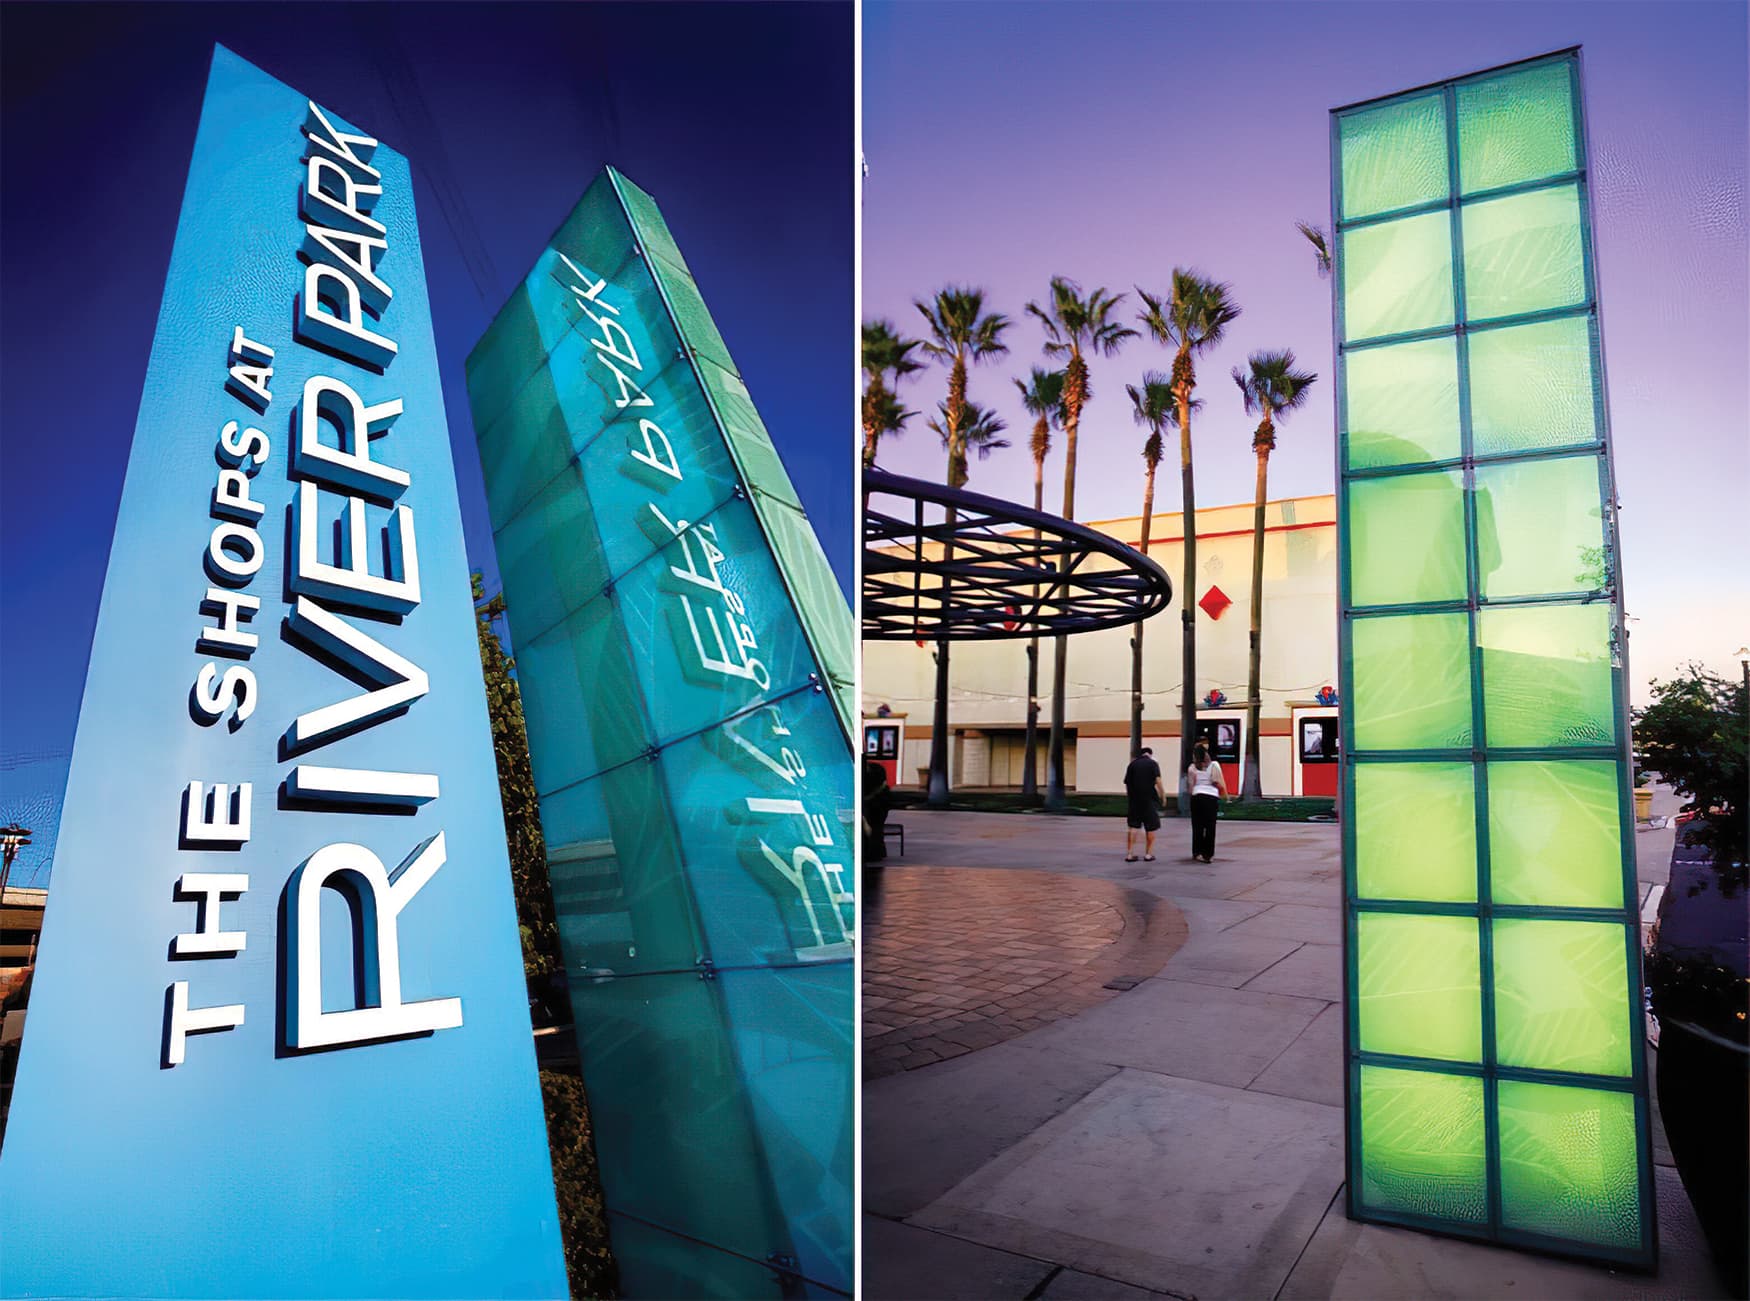 The Shops at River Park, a retail shopping center in Fresno, California. RSM Design prepared environmental graphic design services as well as wayfinding and placemaking elements. Project Identity Totem.